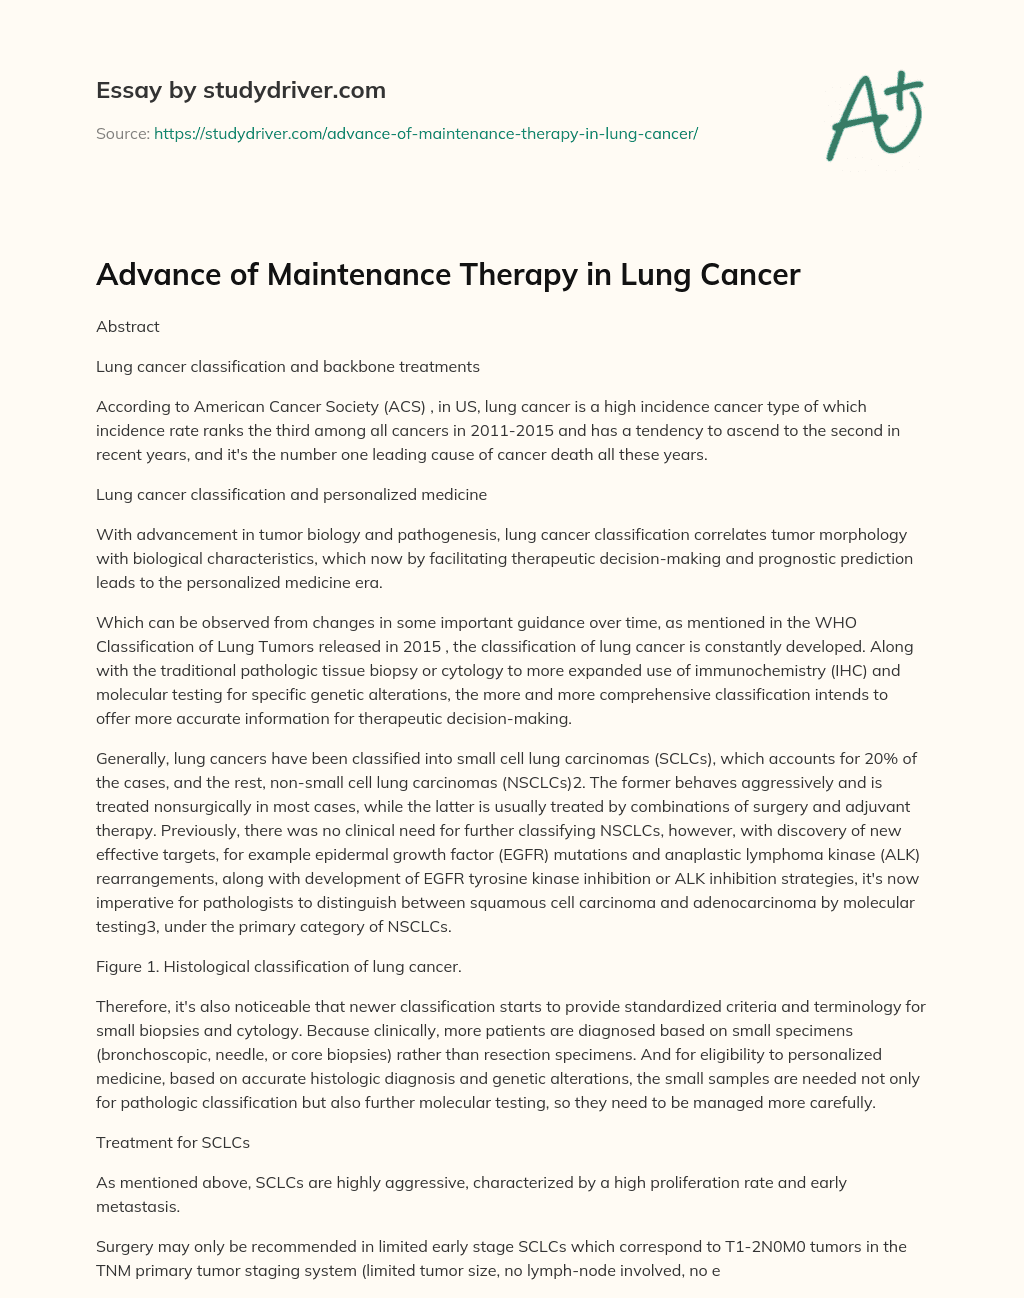 Advance of Maintenance Therapy in Lung Cancer essay